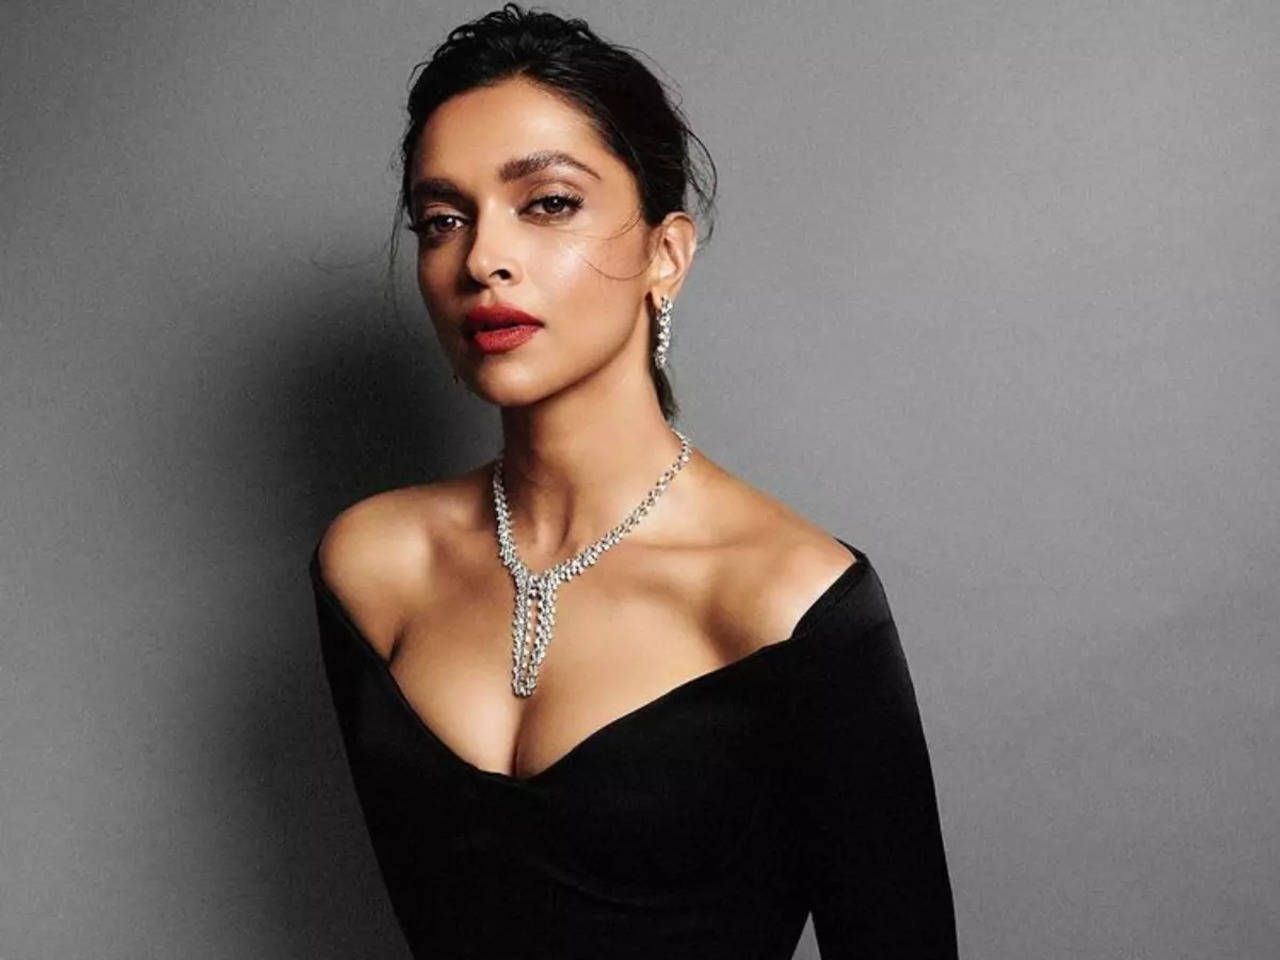 Parth on X: Saw this coming! 🚨BREAKING! Deepika Padukone bagged another  huge international brand, CARTIER (No. 2 valuable jewel brand in the  world). What an incredible year she's having. She's endorsing brands